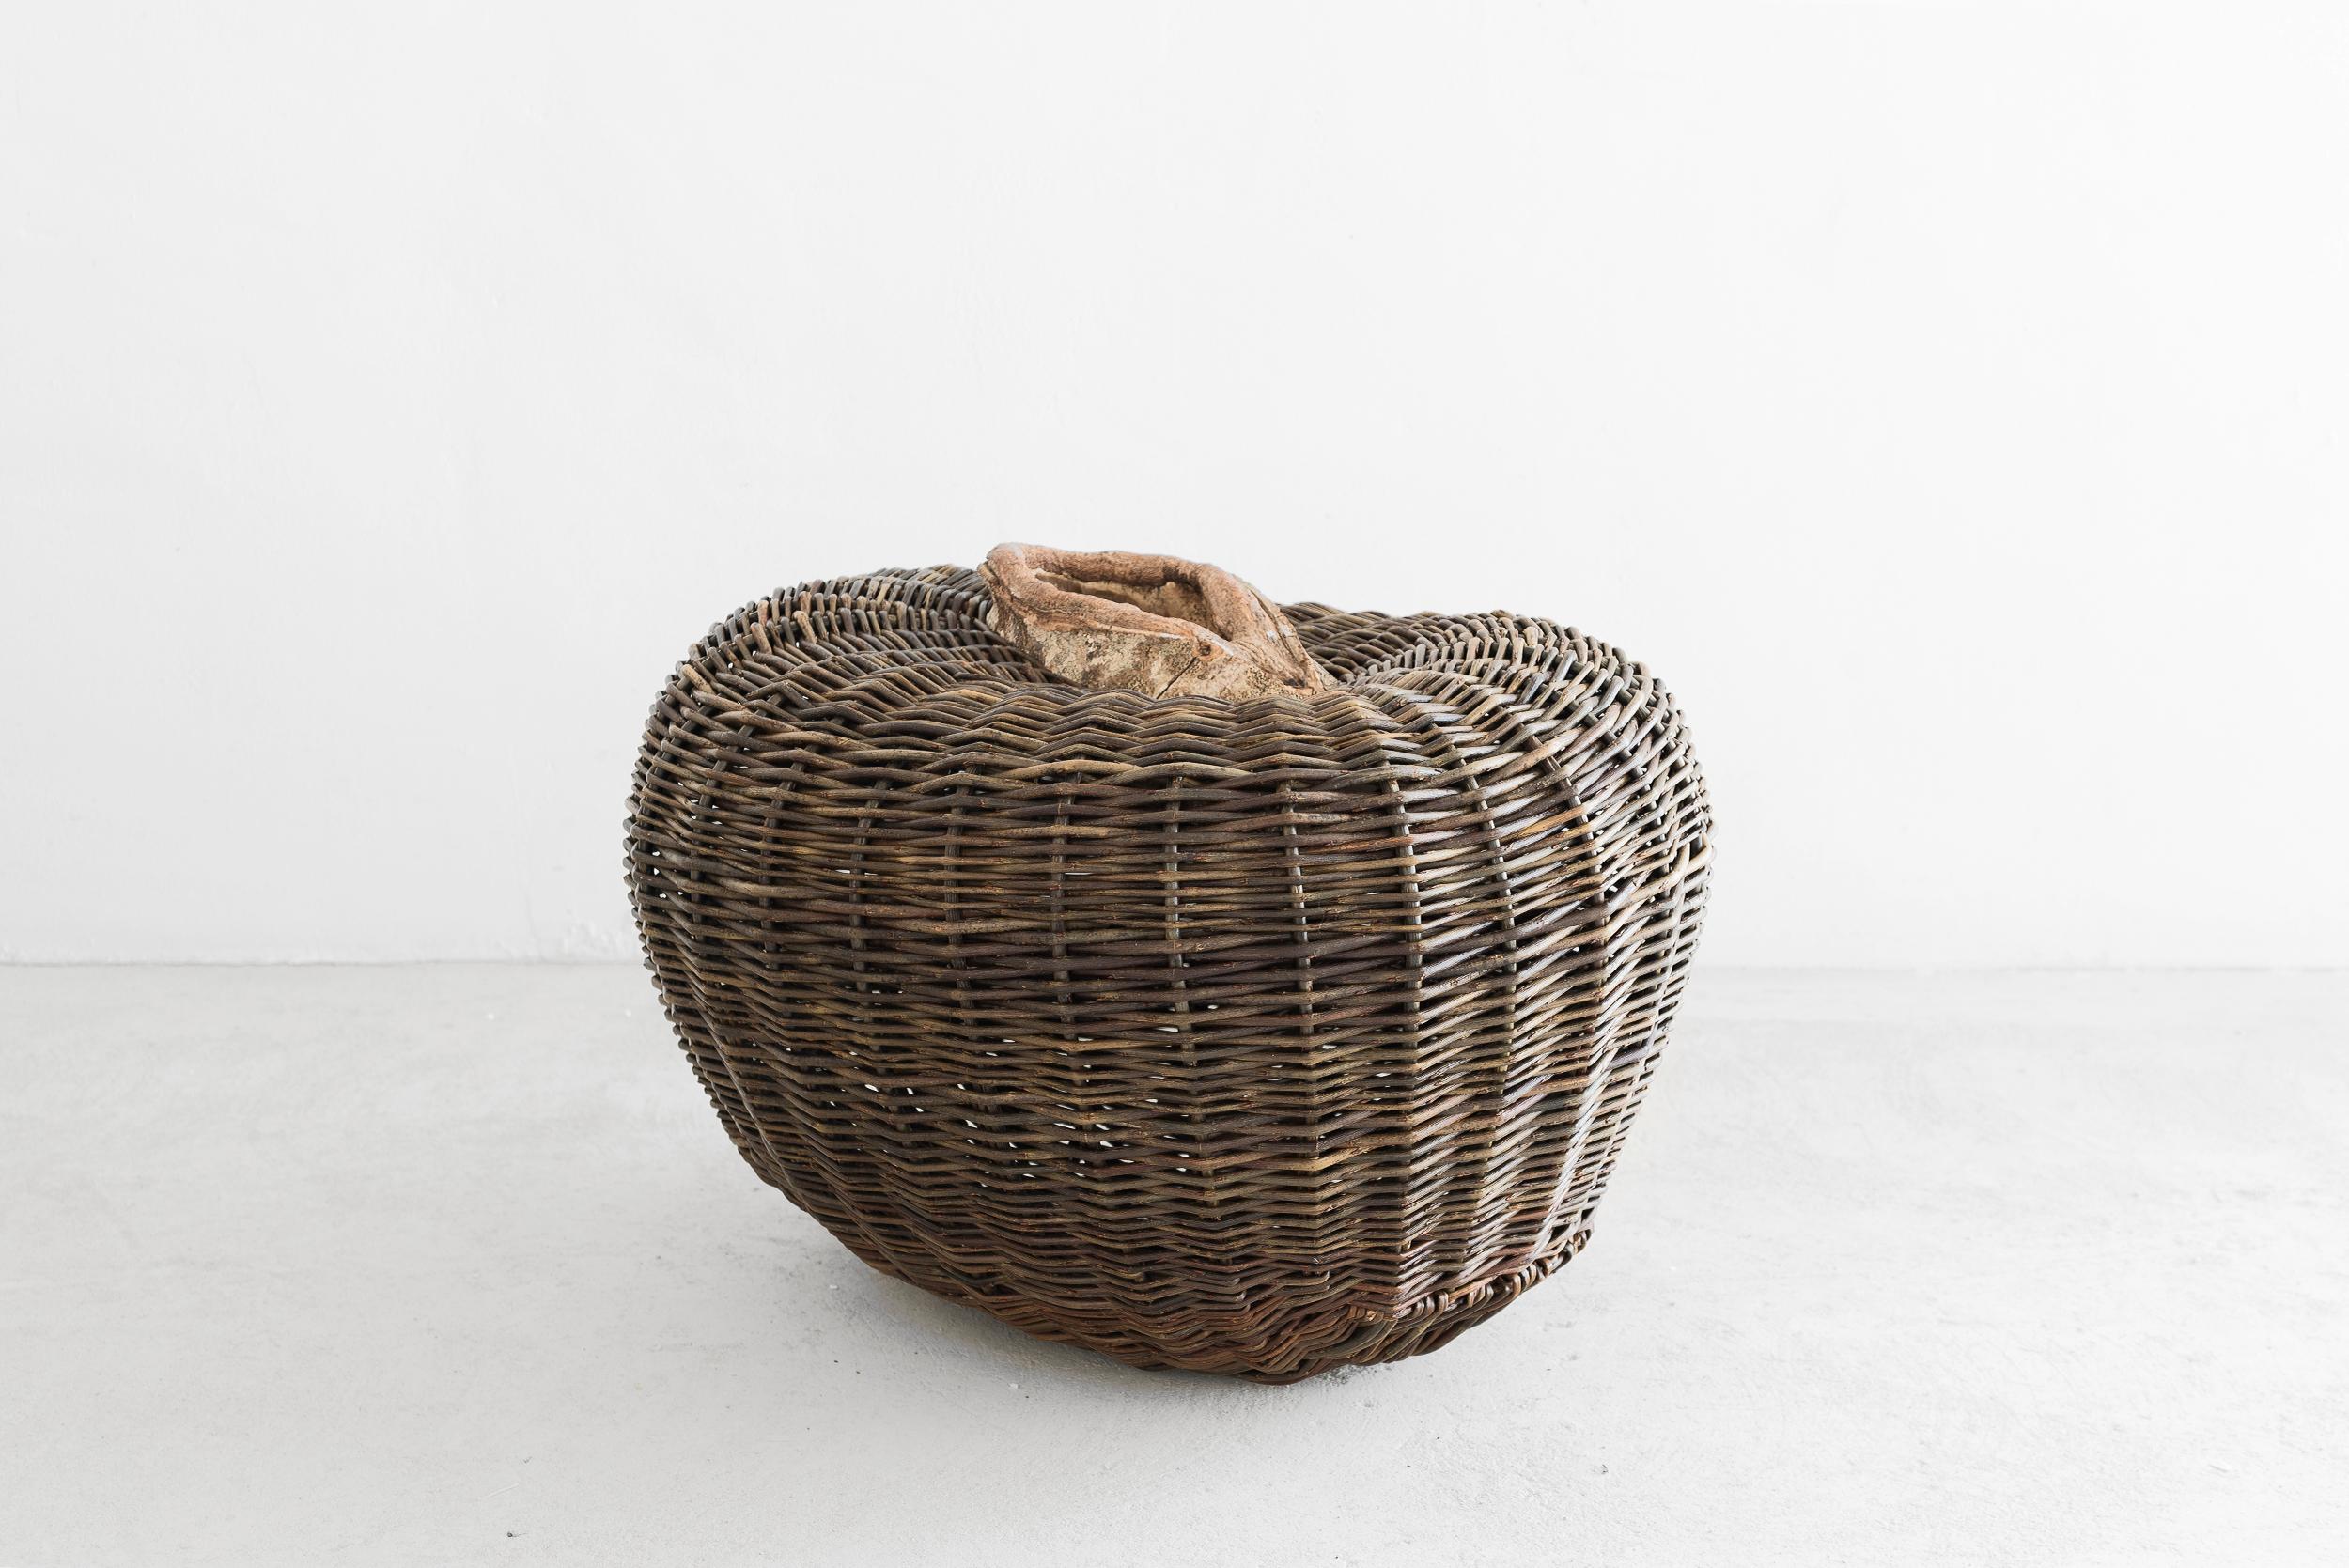 Joe Hogan
Pod on beechwood
Manufactured by Joe Hogan
Produced in exclusive for Side Gallery
Ireland, 2020
Beechwood

Joe Hogan is a master basket-maker based in Loch Na Fooey, a glacial lake situated in the west of Ireland. He has been